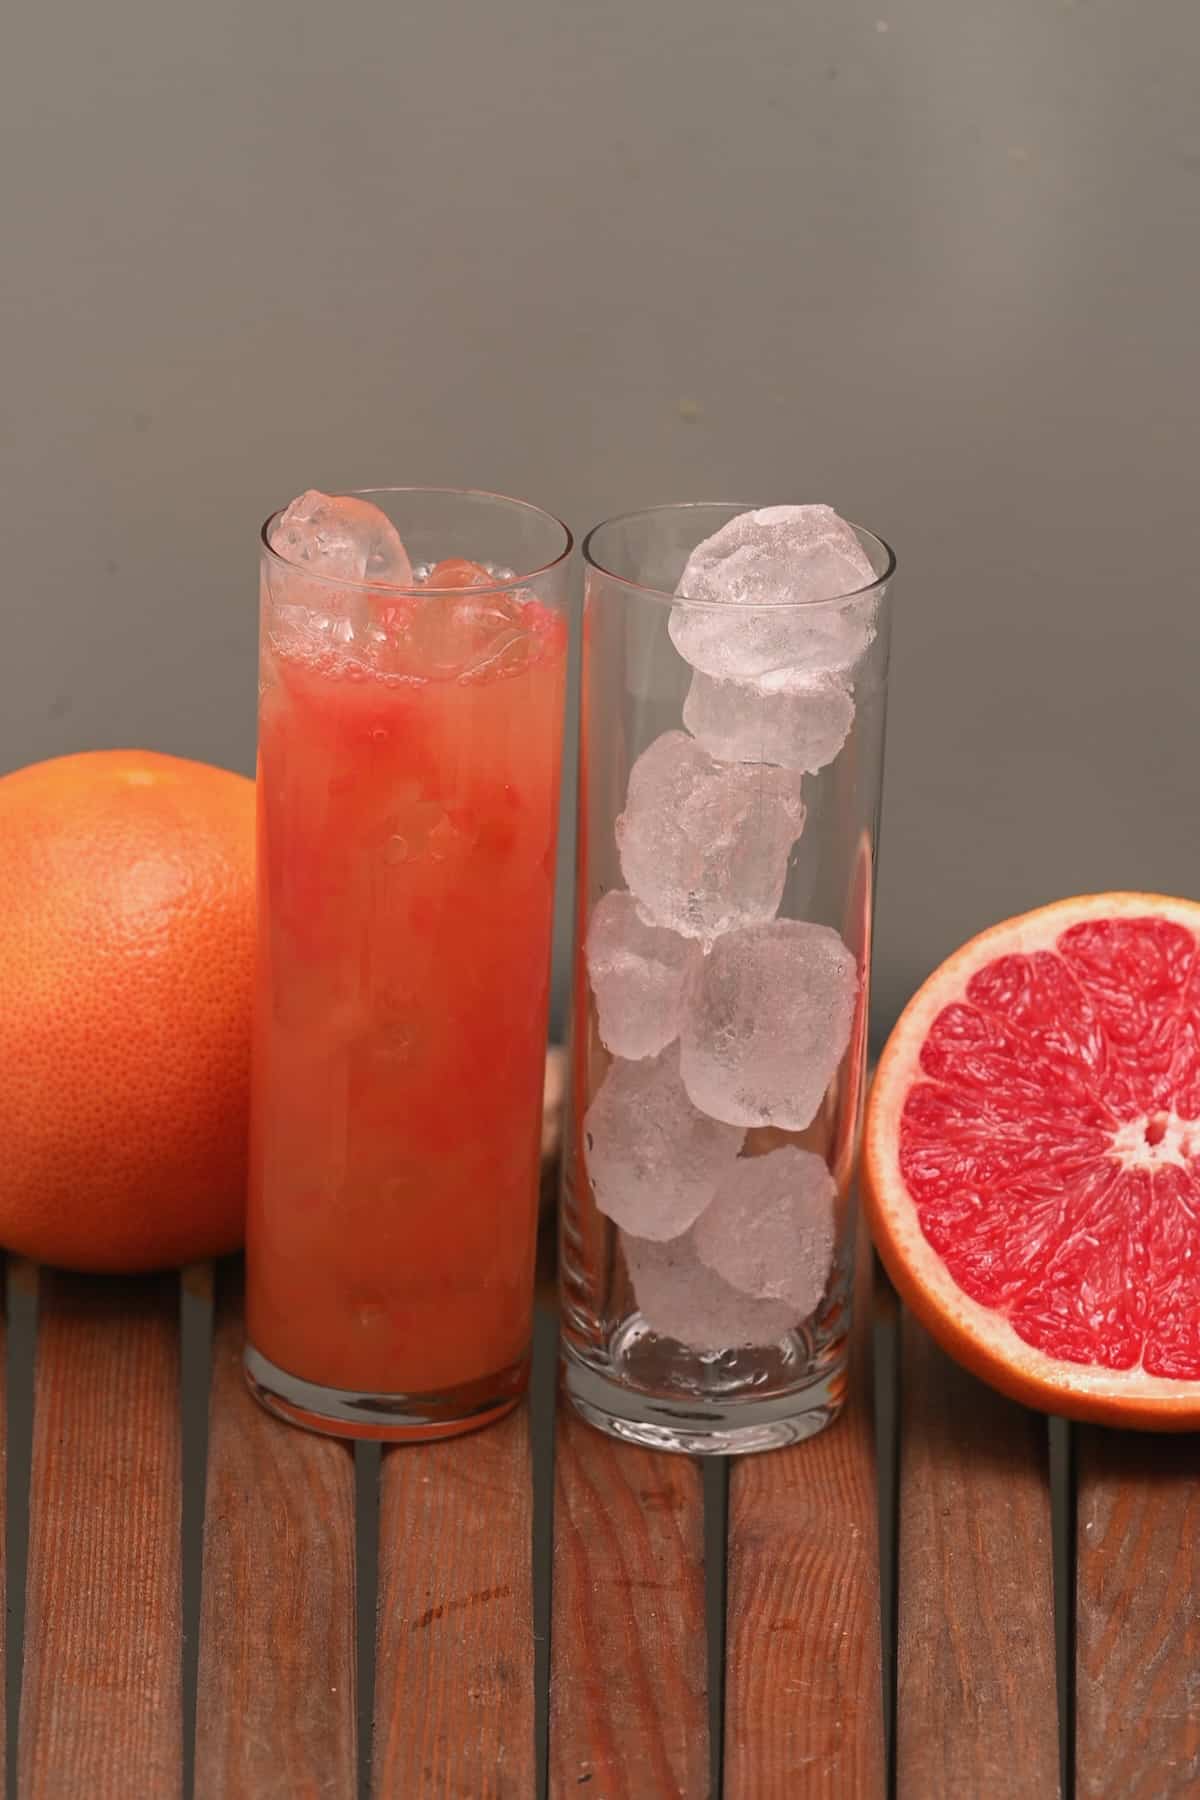 A glass filled with citrus juice